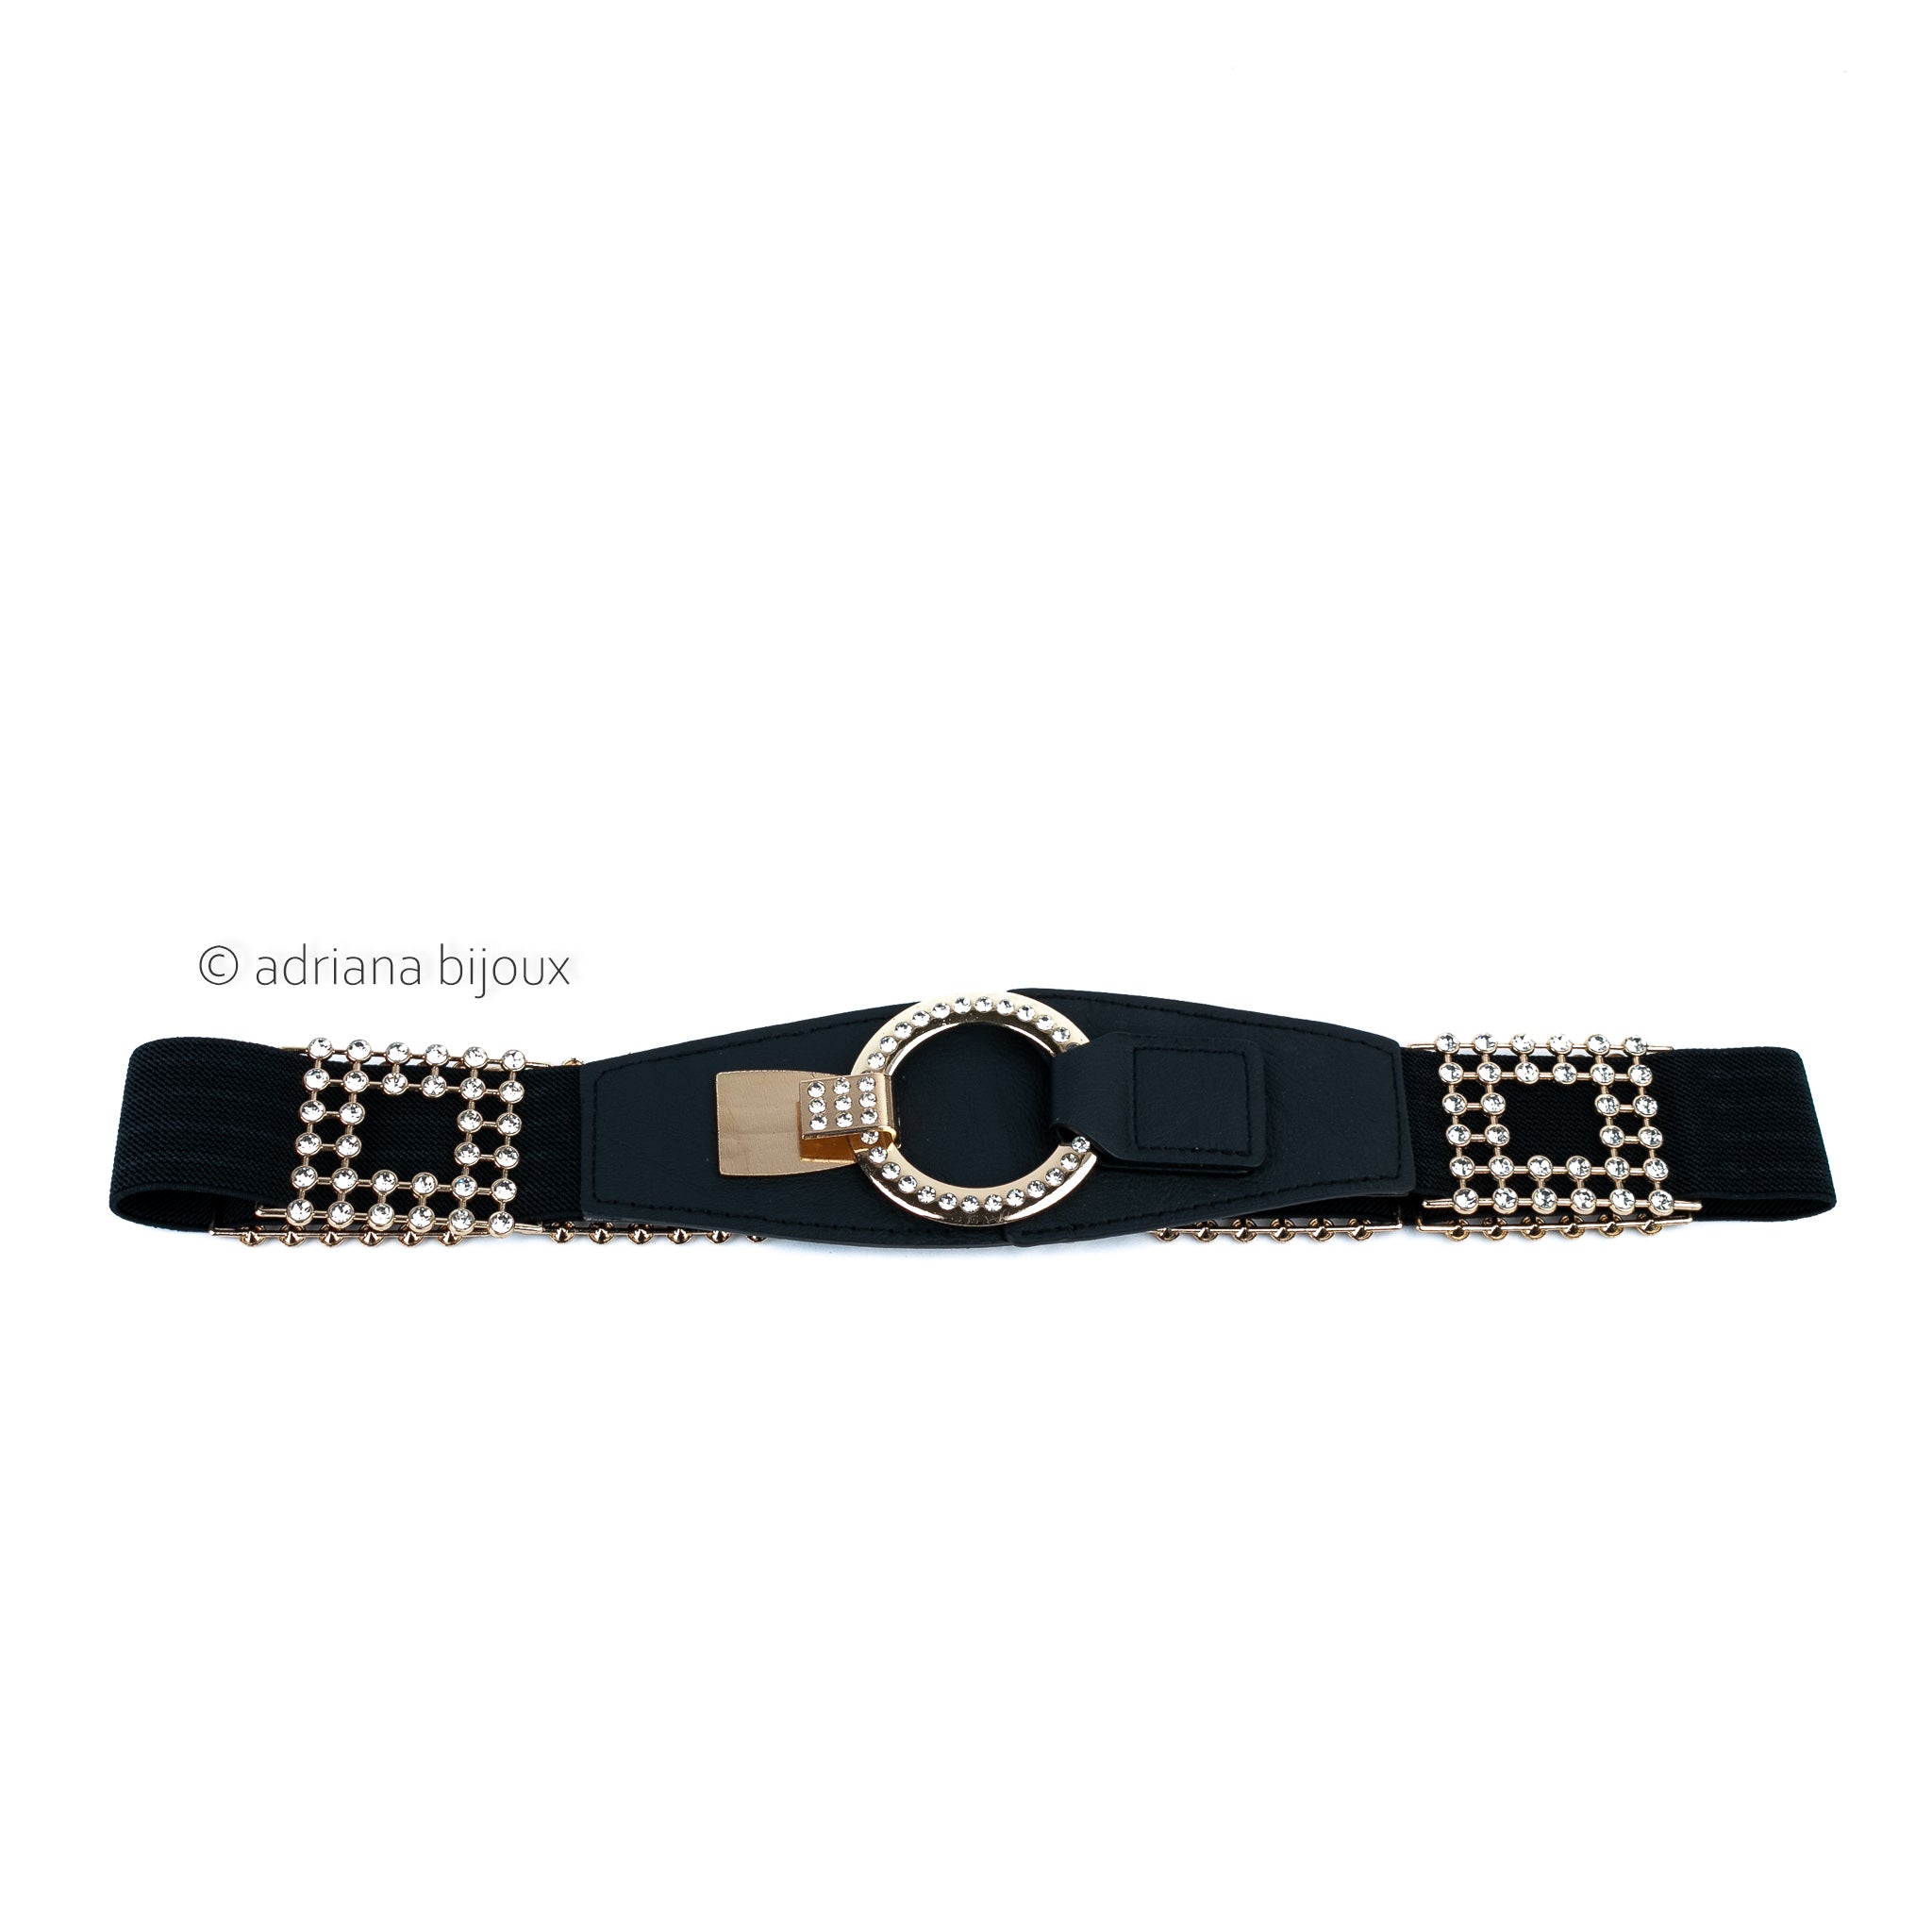 Plus Size Belts - Chain, Leather & Stretch